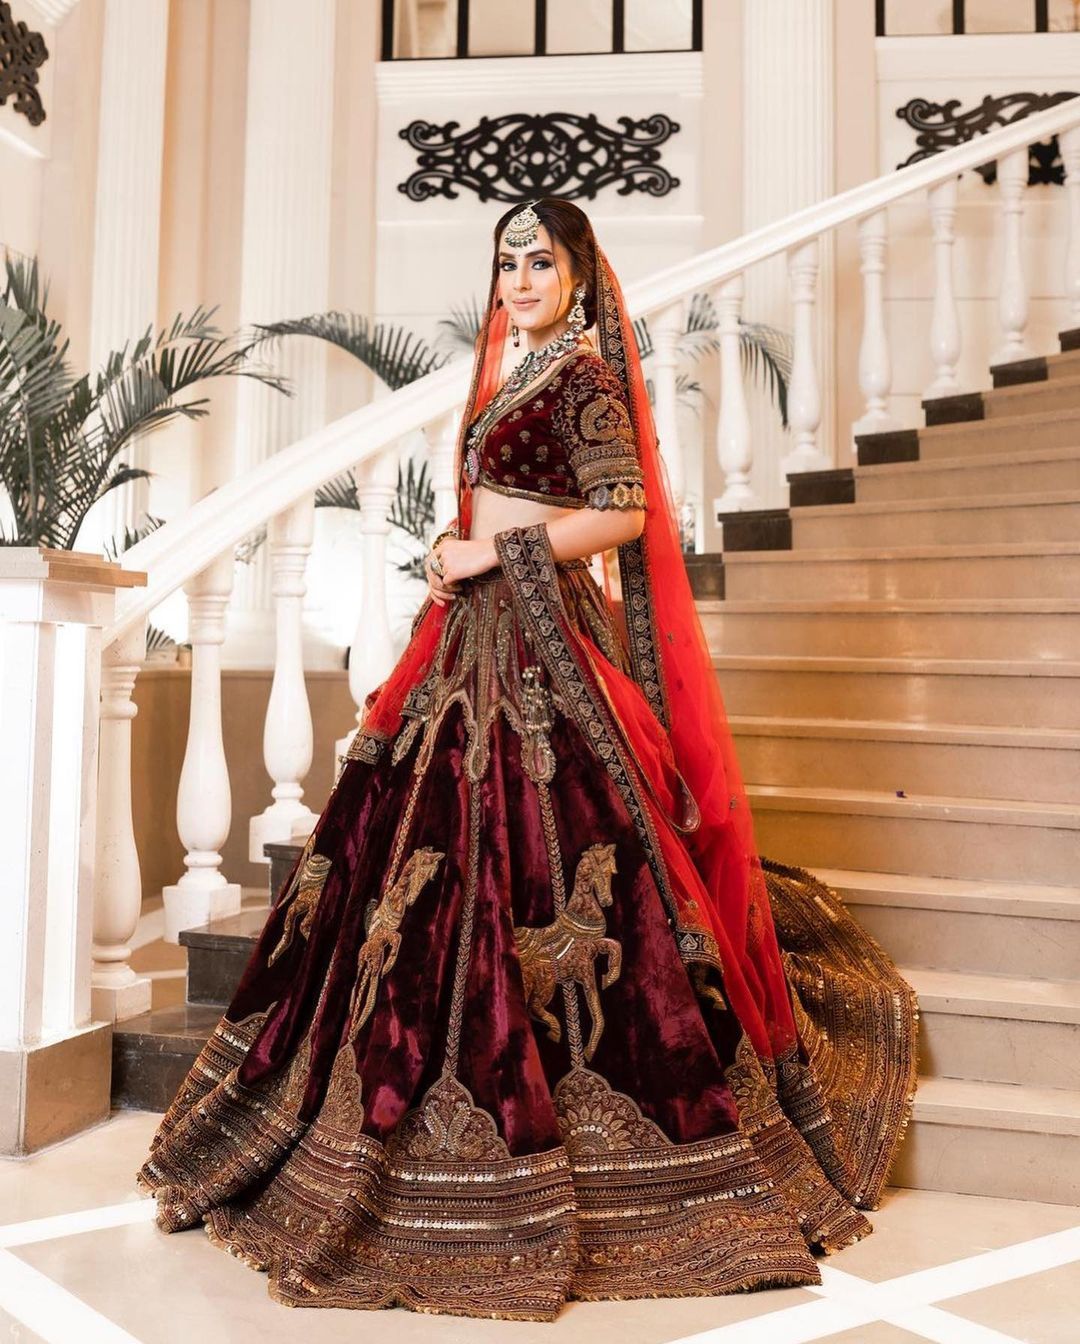 BE THE MOST BEAUTIFUL BRIDE WITH THESE INDIAN WEDDING LEHENGAS | Readiprint  Fashions Blog